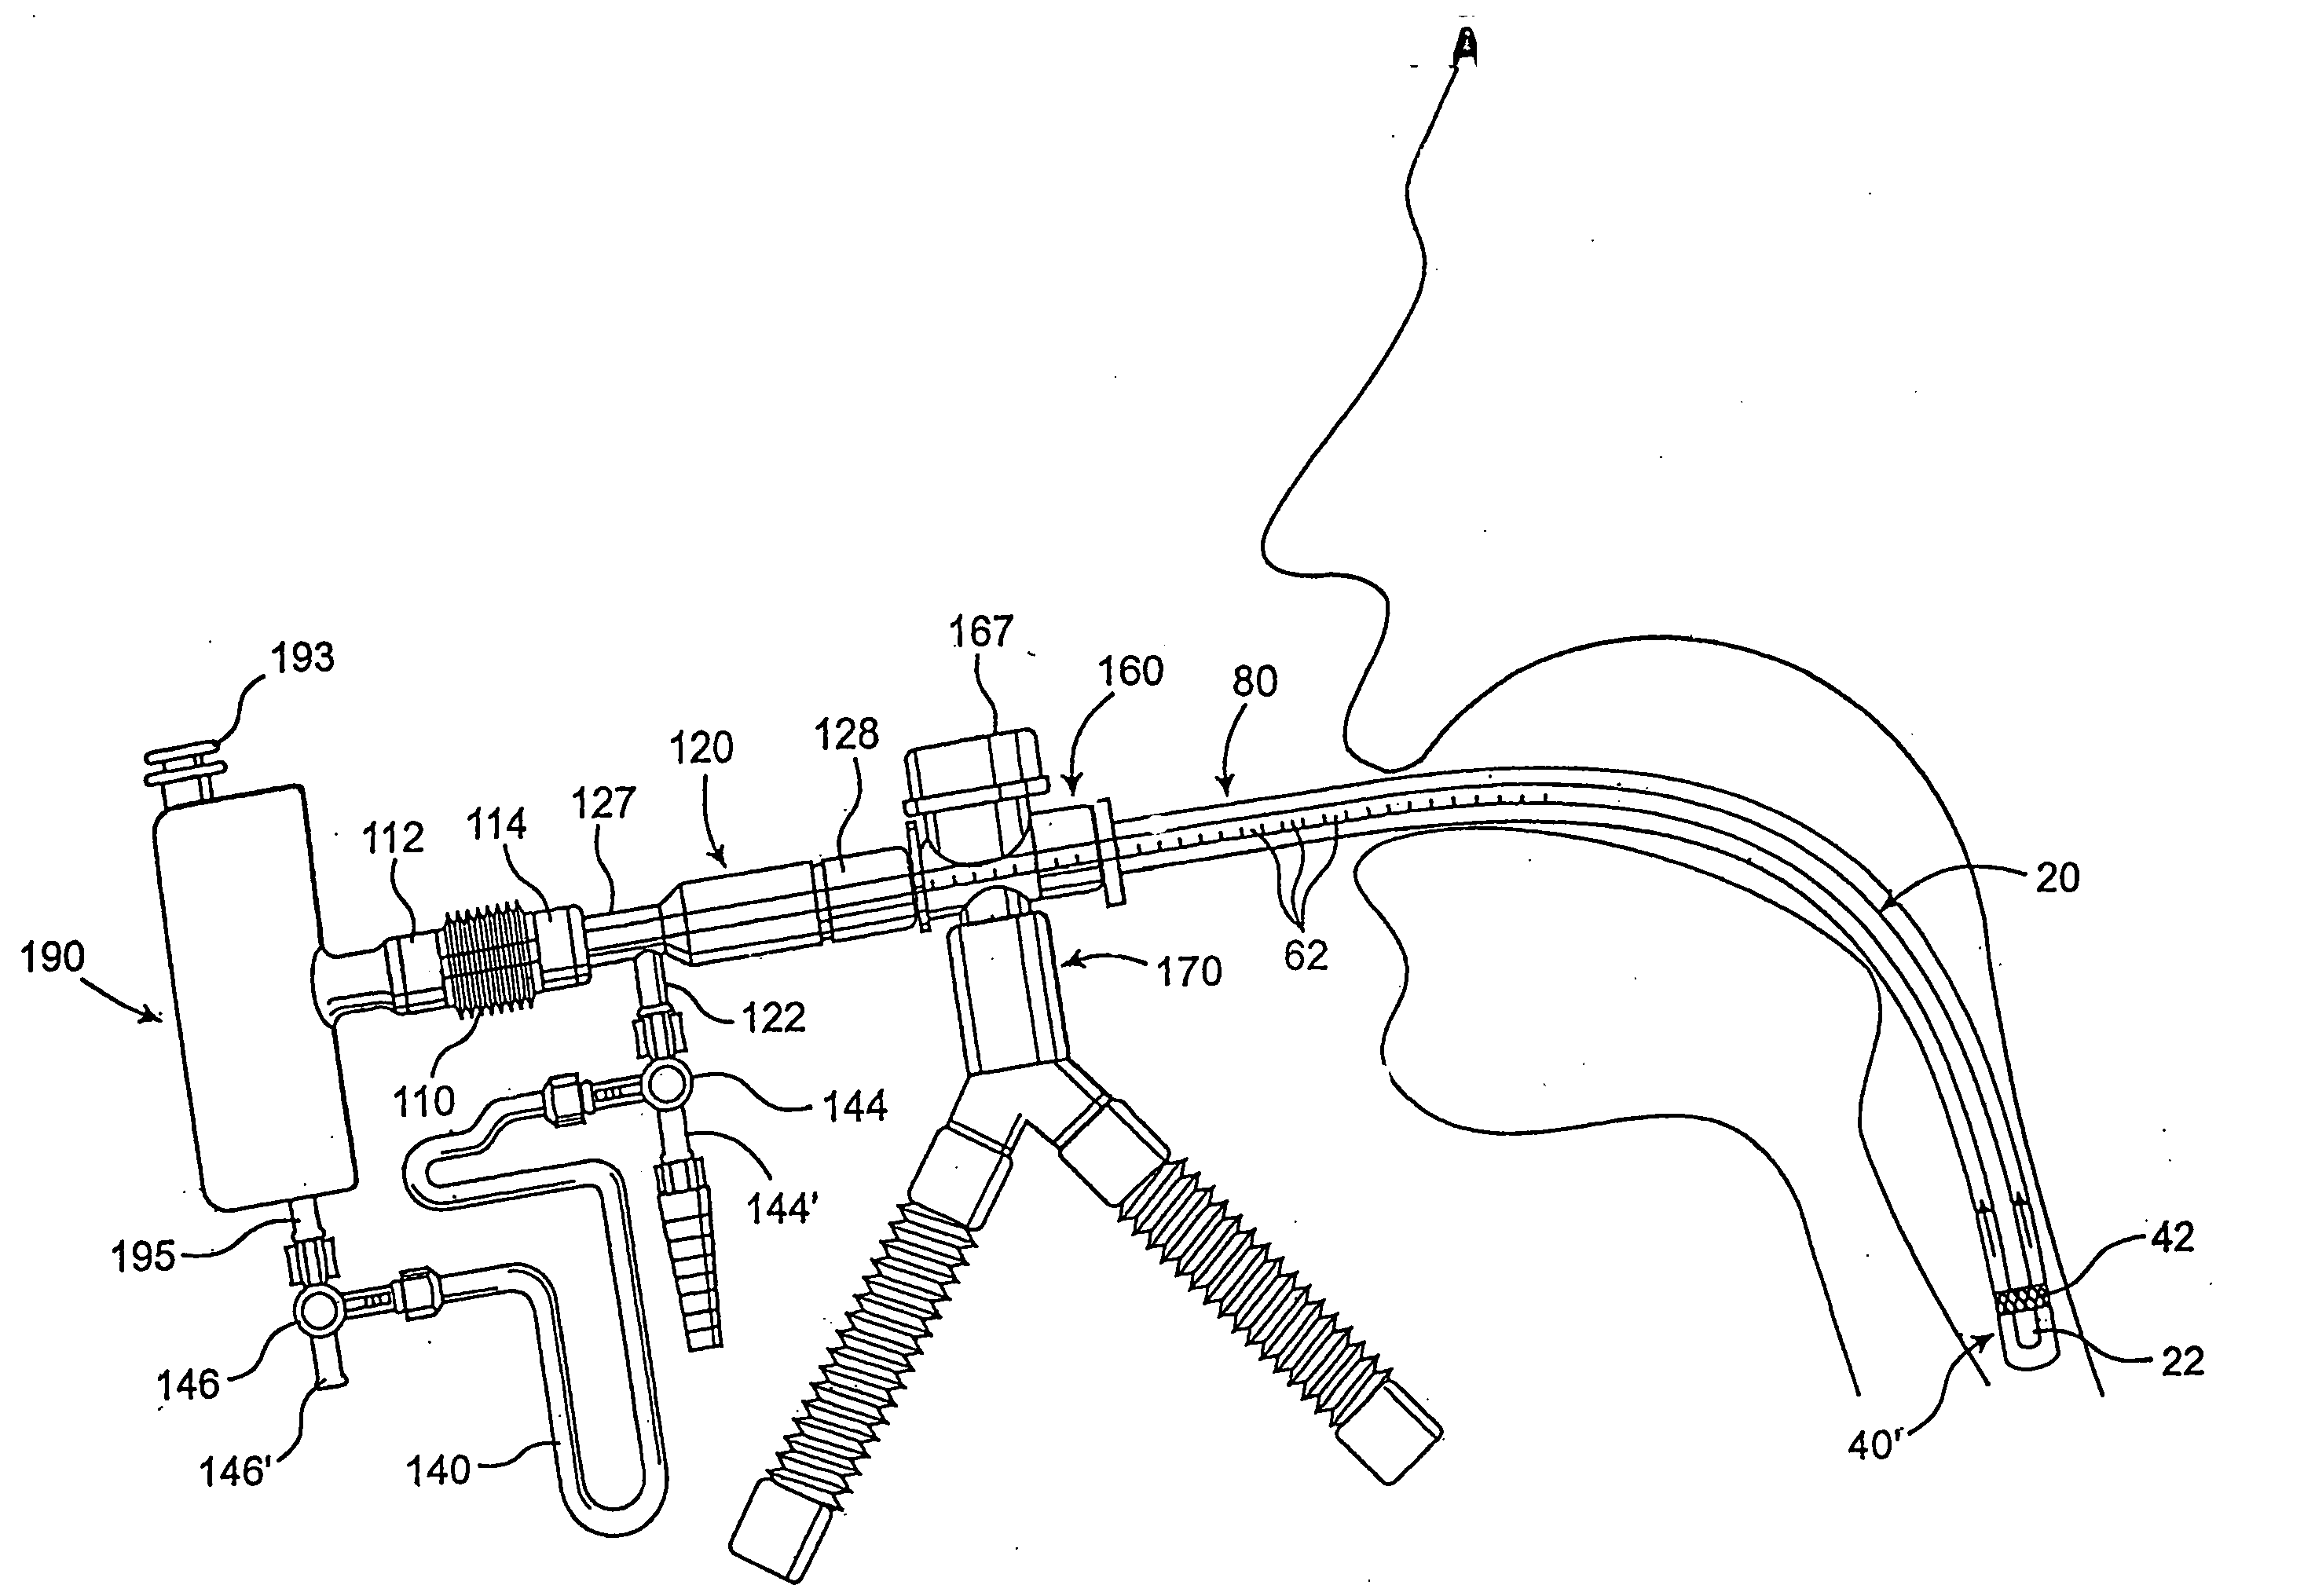 Endotracheal tube cleaning apparatus